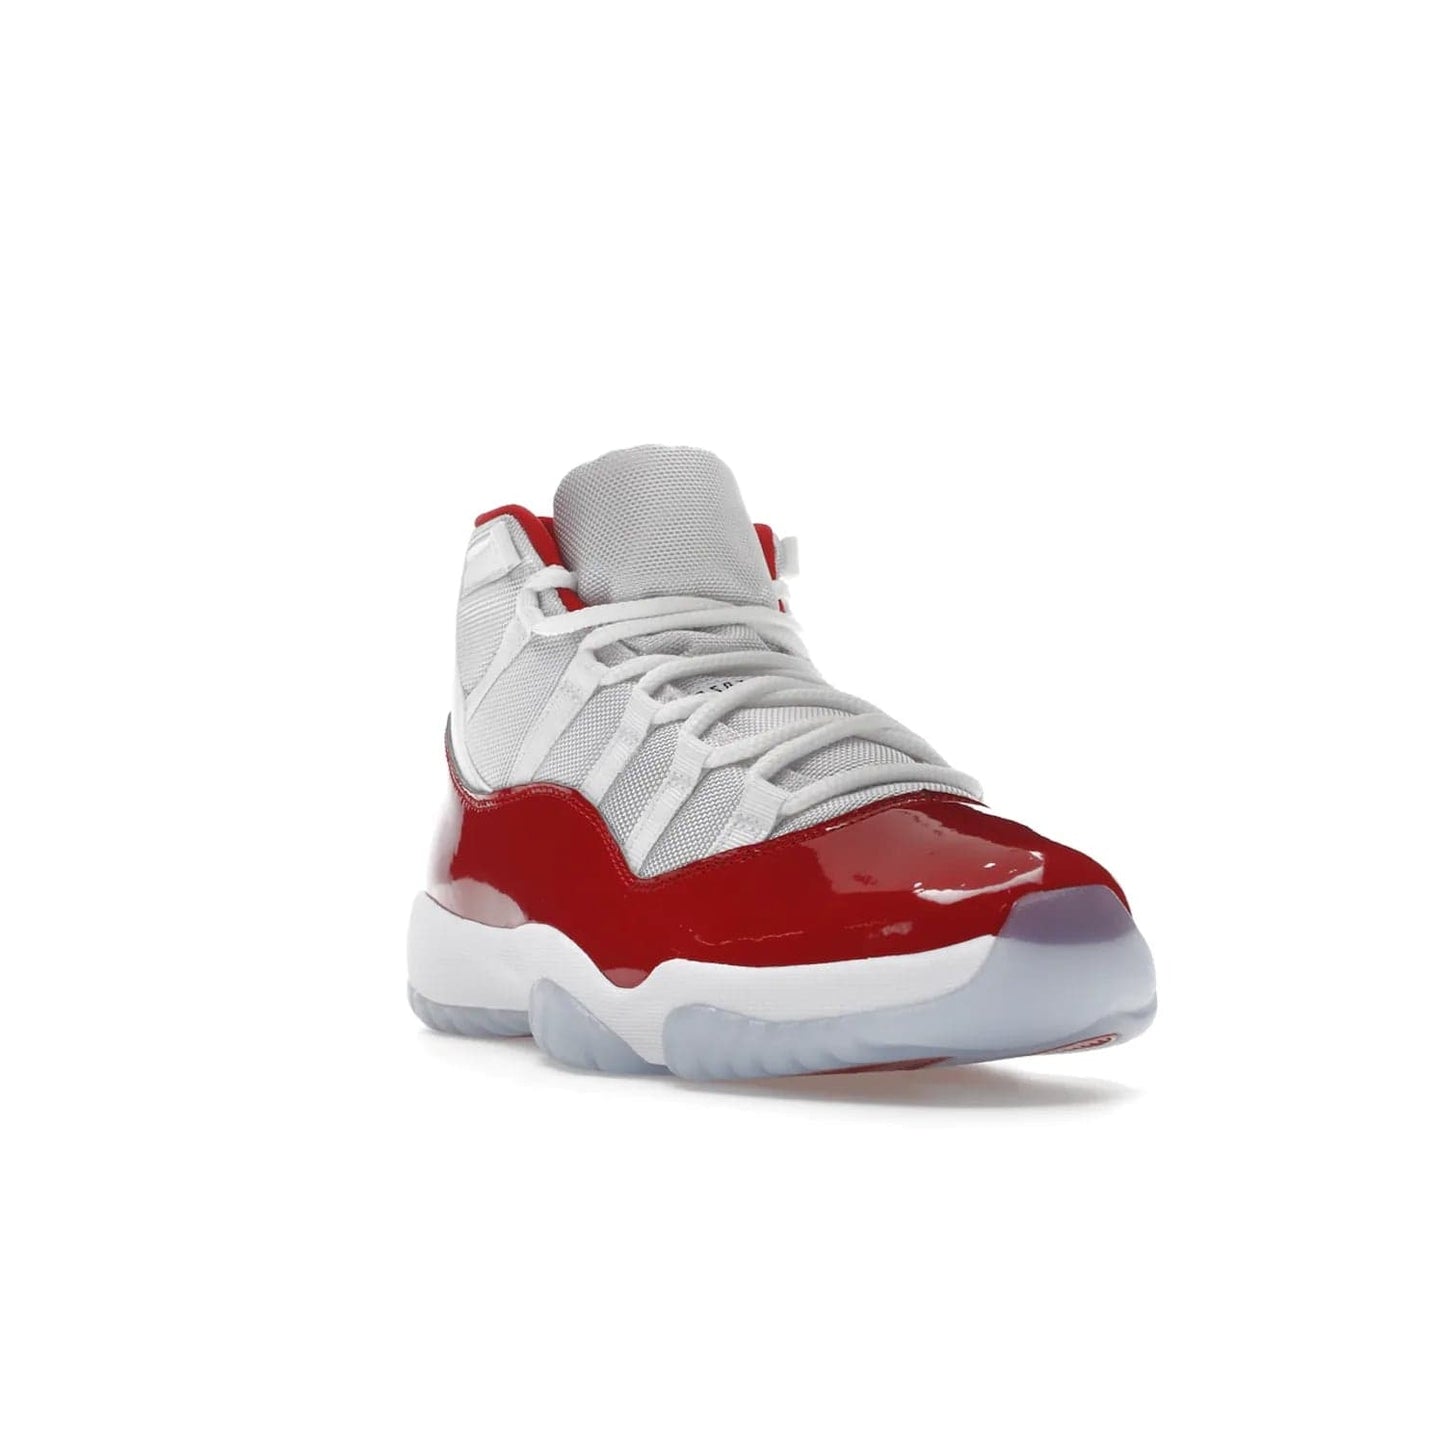 Jordan 11 Retro Cherry (2022) - Image 7 - Only at www.BallersClubKickz.com - The Air Jordan 11 Cherry features classic patent leather with Cherry red accents, icy blue outsole, and debossed 23 on the heel tab. Refresh your sneaker game with this iconic update, available December 10, 2022.